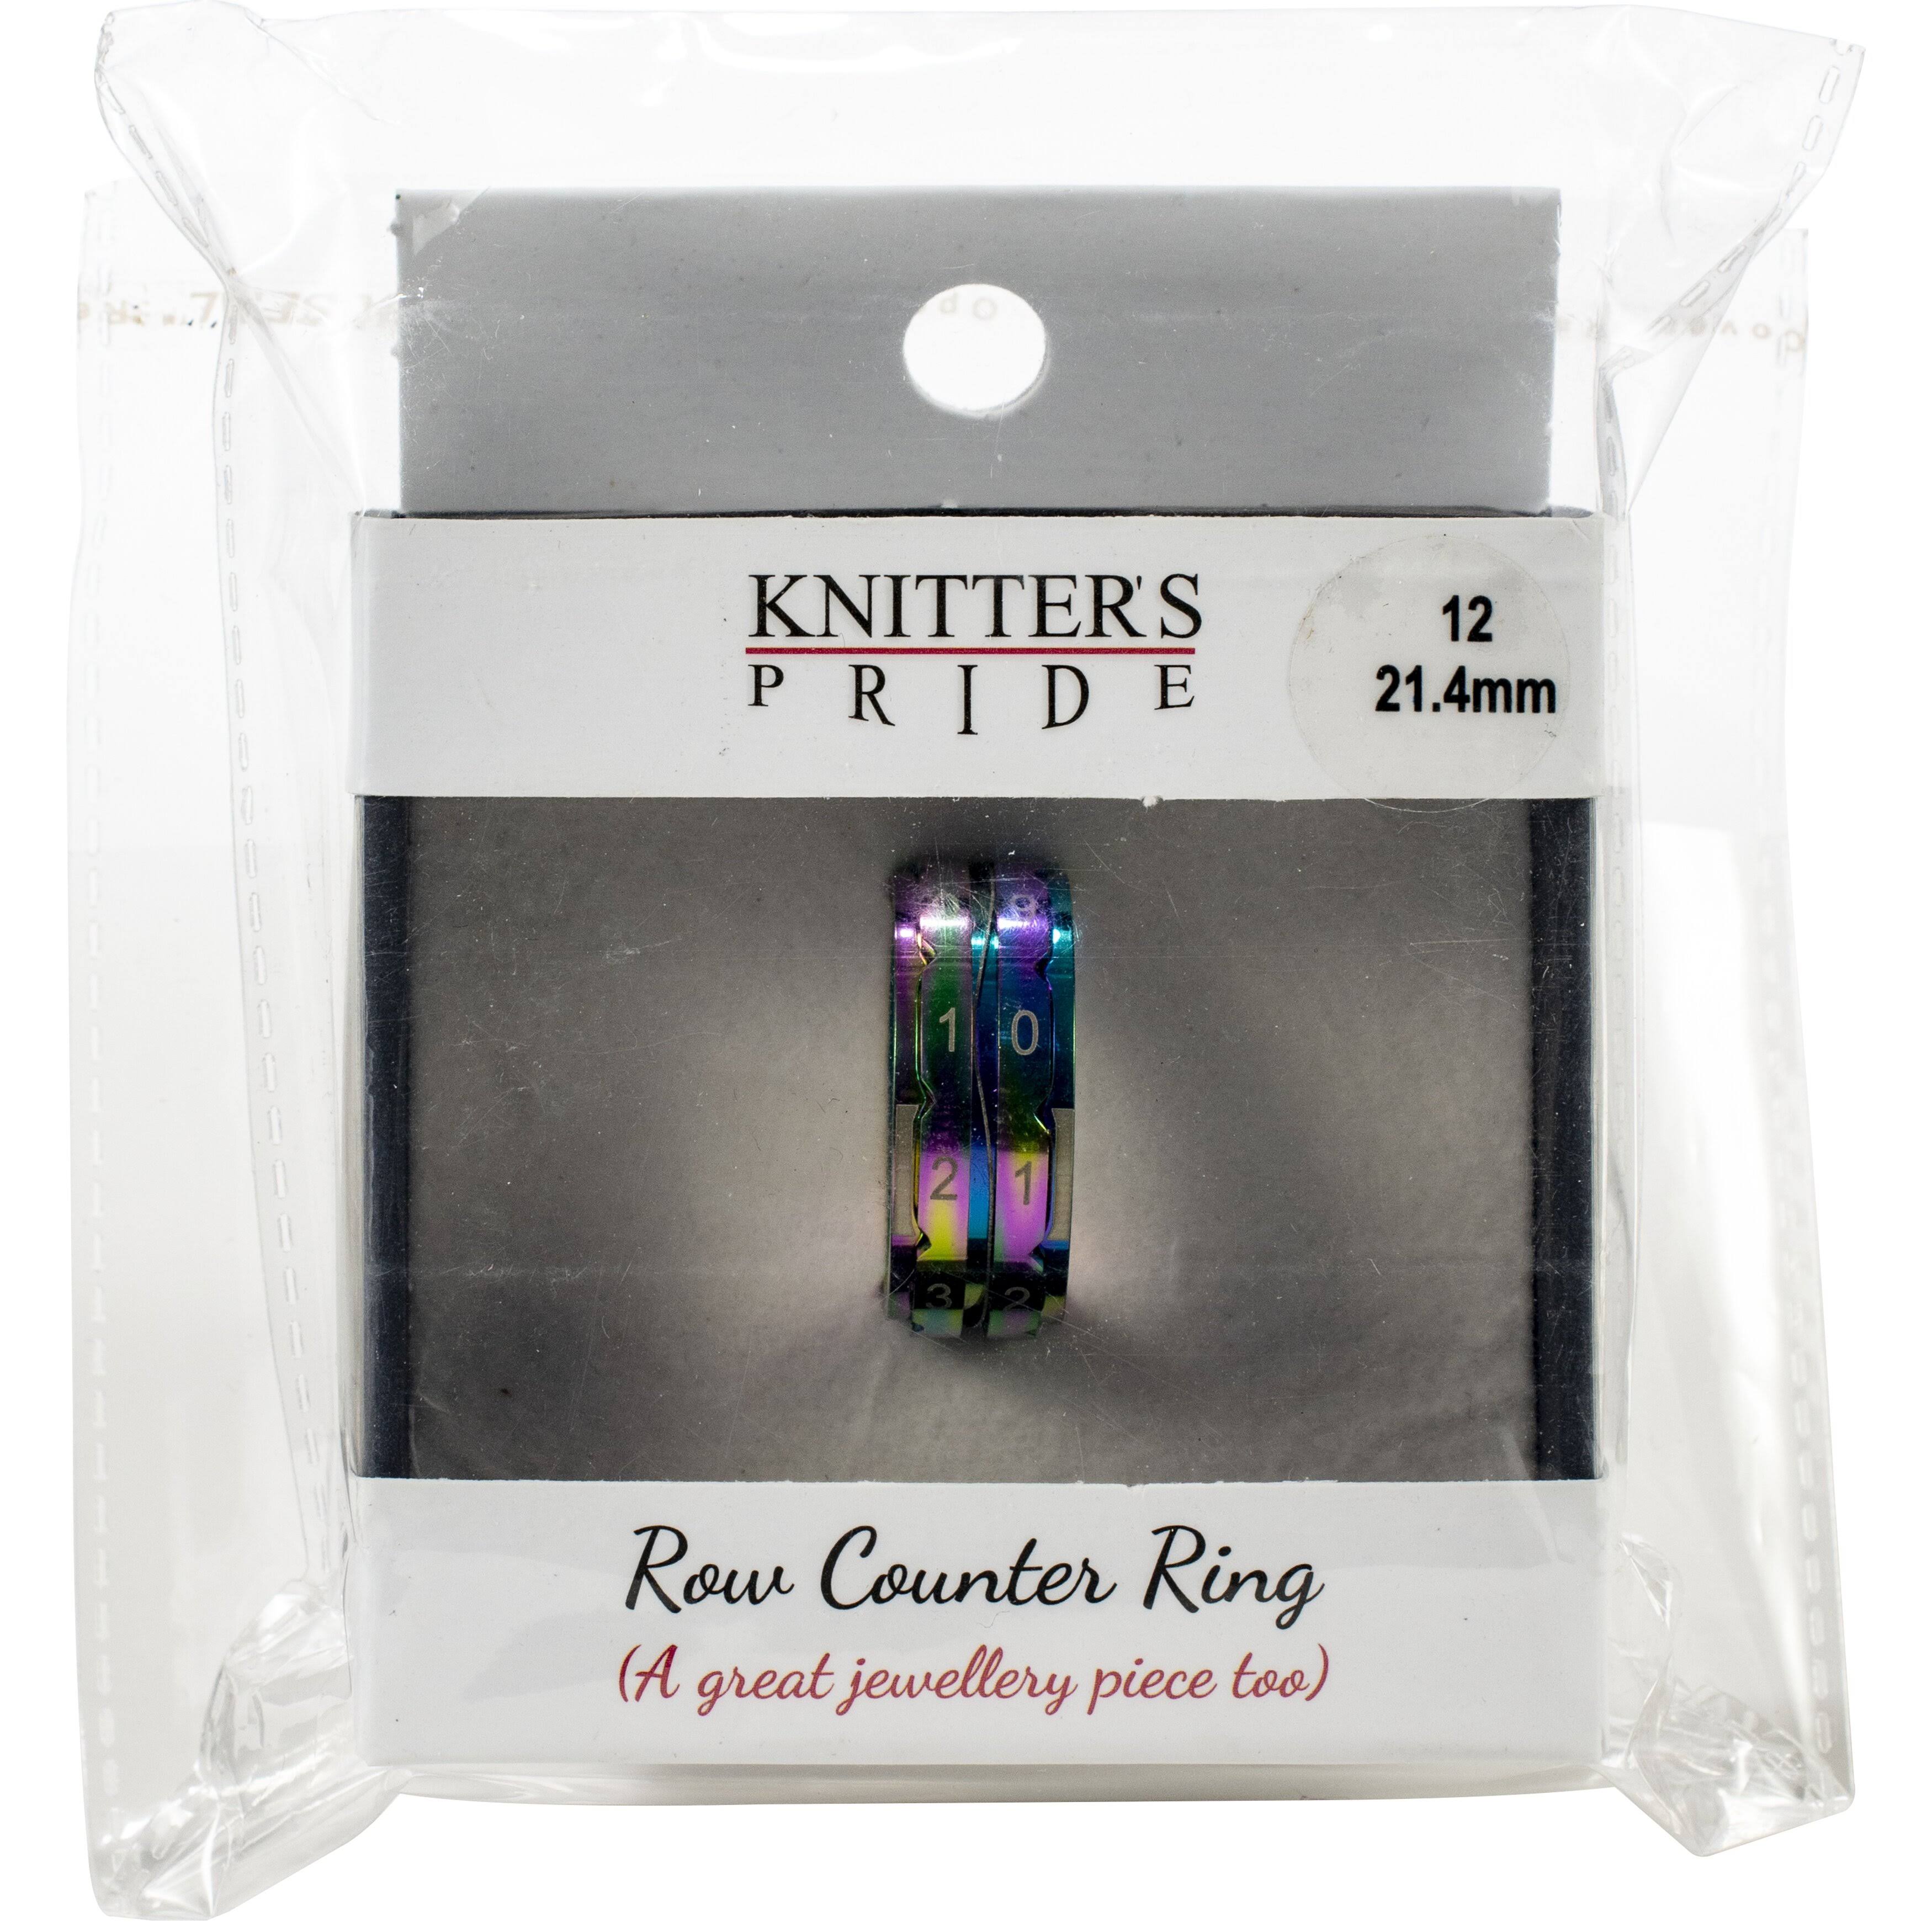 Knitter's Pride Rainbow Row counter Ring-Size 12: 21.4mm Diameter